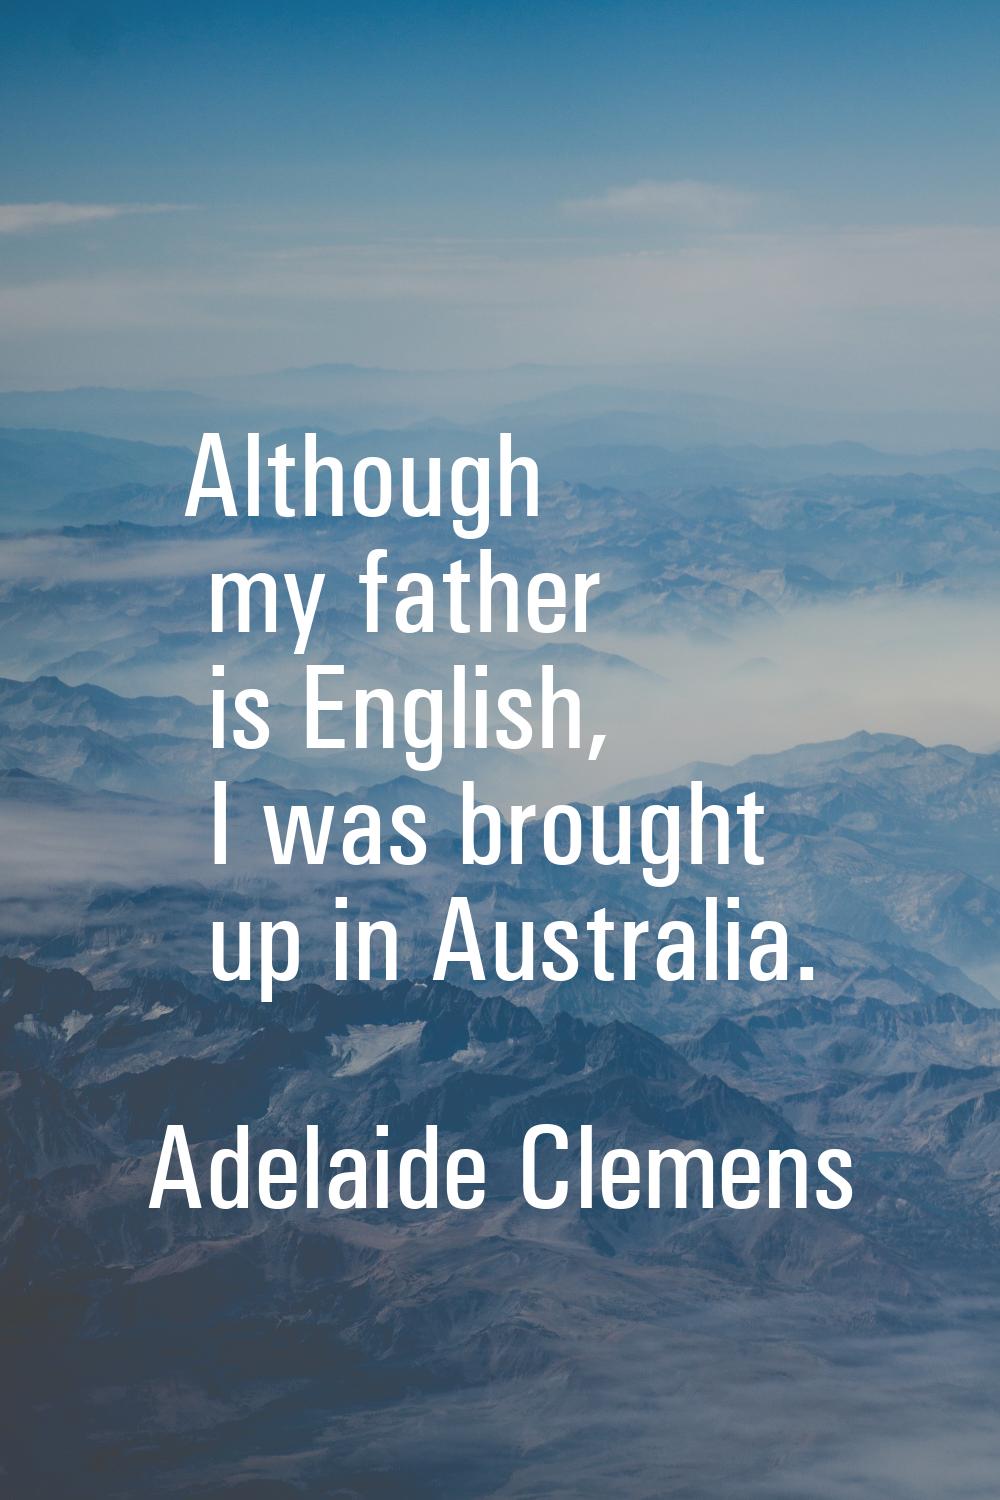 Although my father is English, I was brought up in Australia.